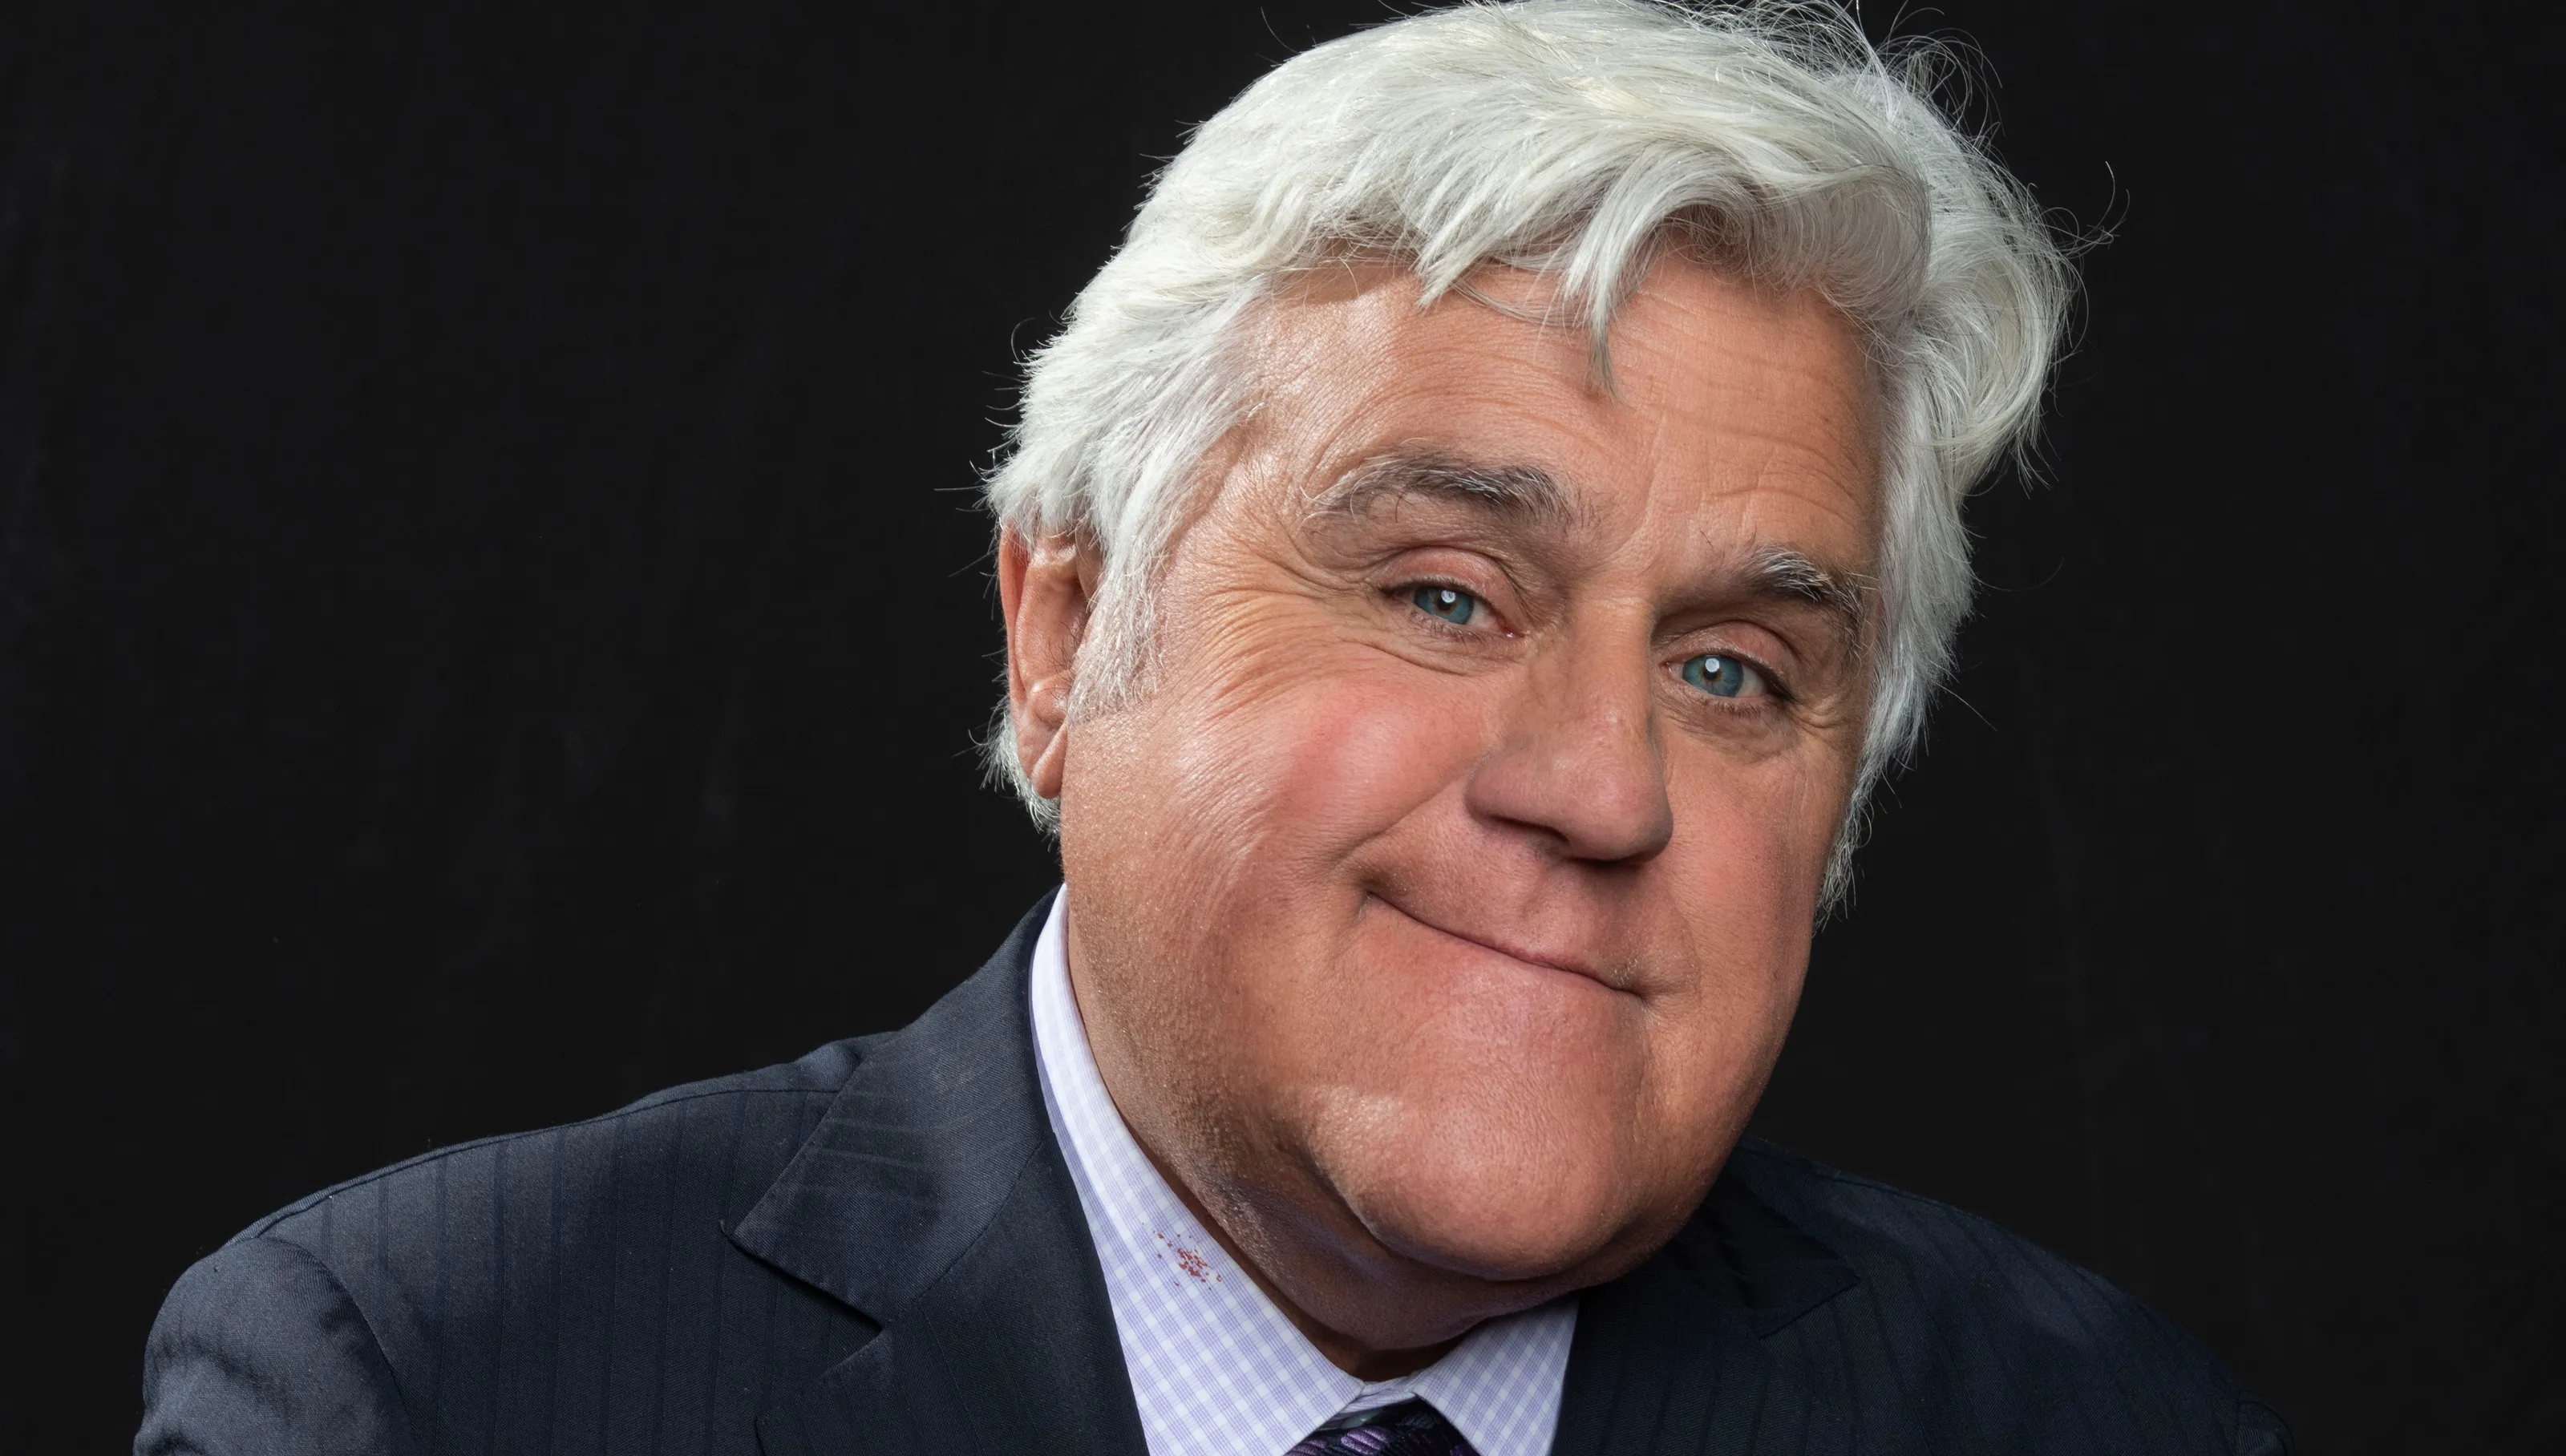 *Rescheduled - Jay Leno at the Genesee Theatre